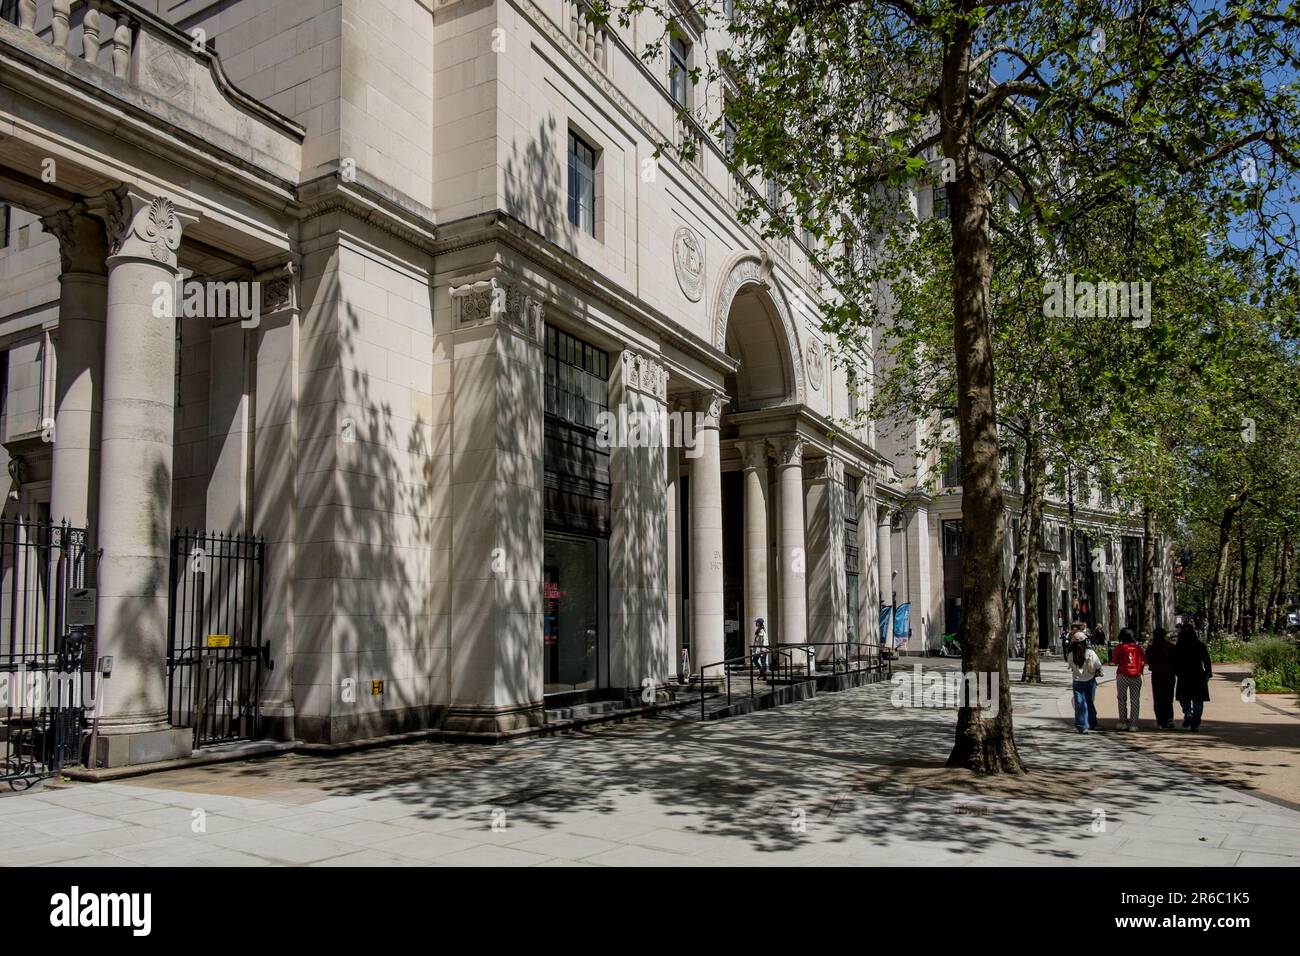 The Strand entrance to Bush House from the now pedestrianised area of the Strand, part of The Northbank Business Improvement District, London, UK Stock Photo